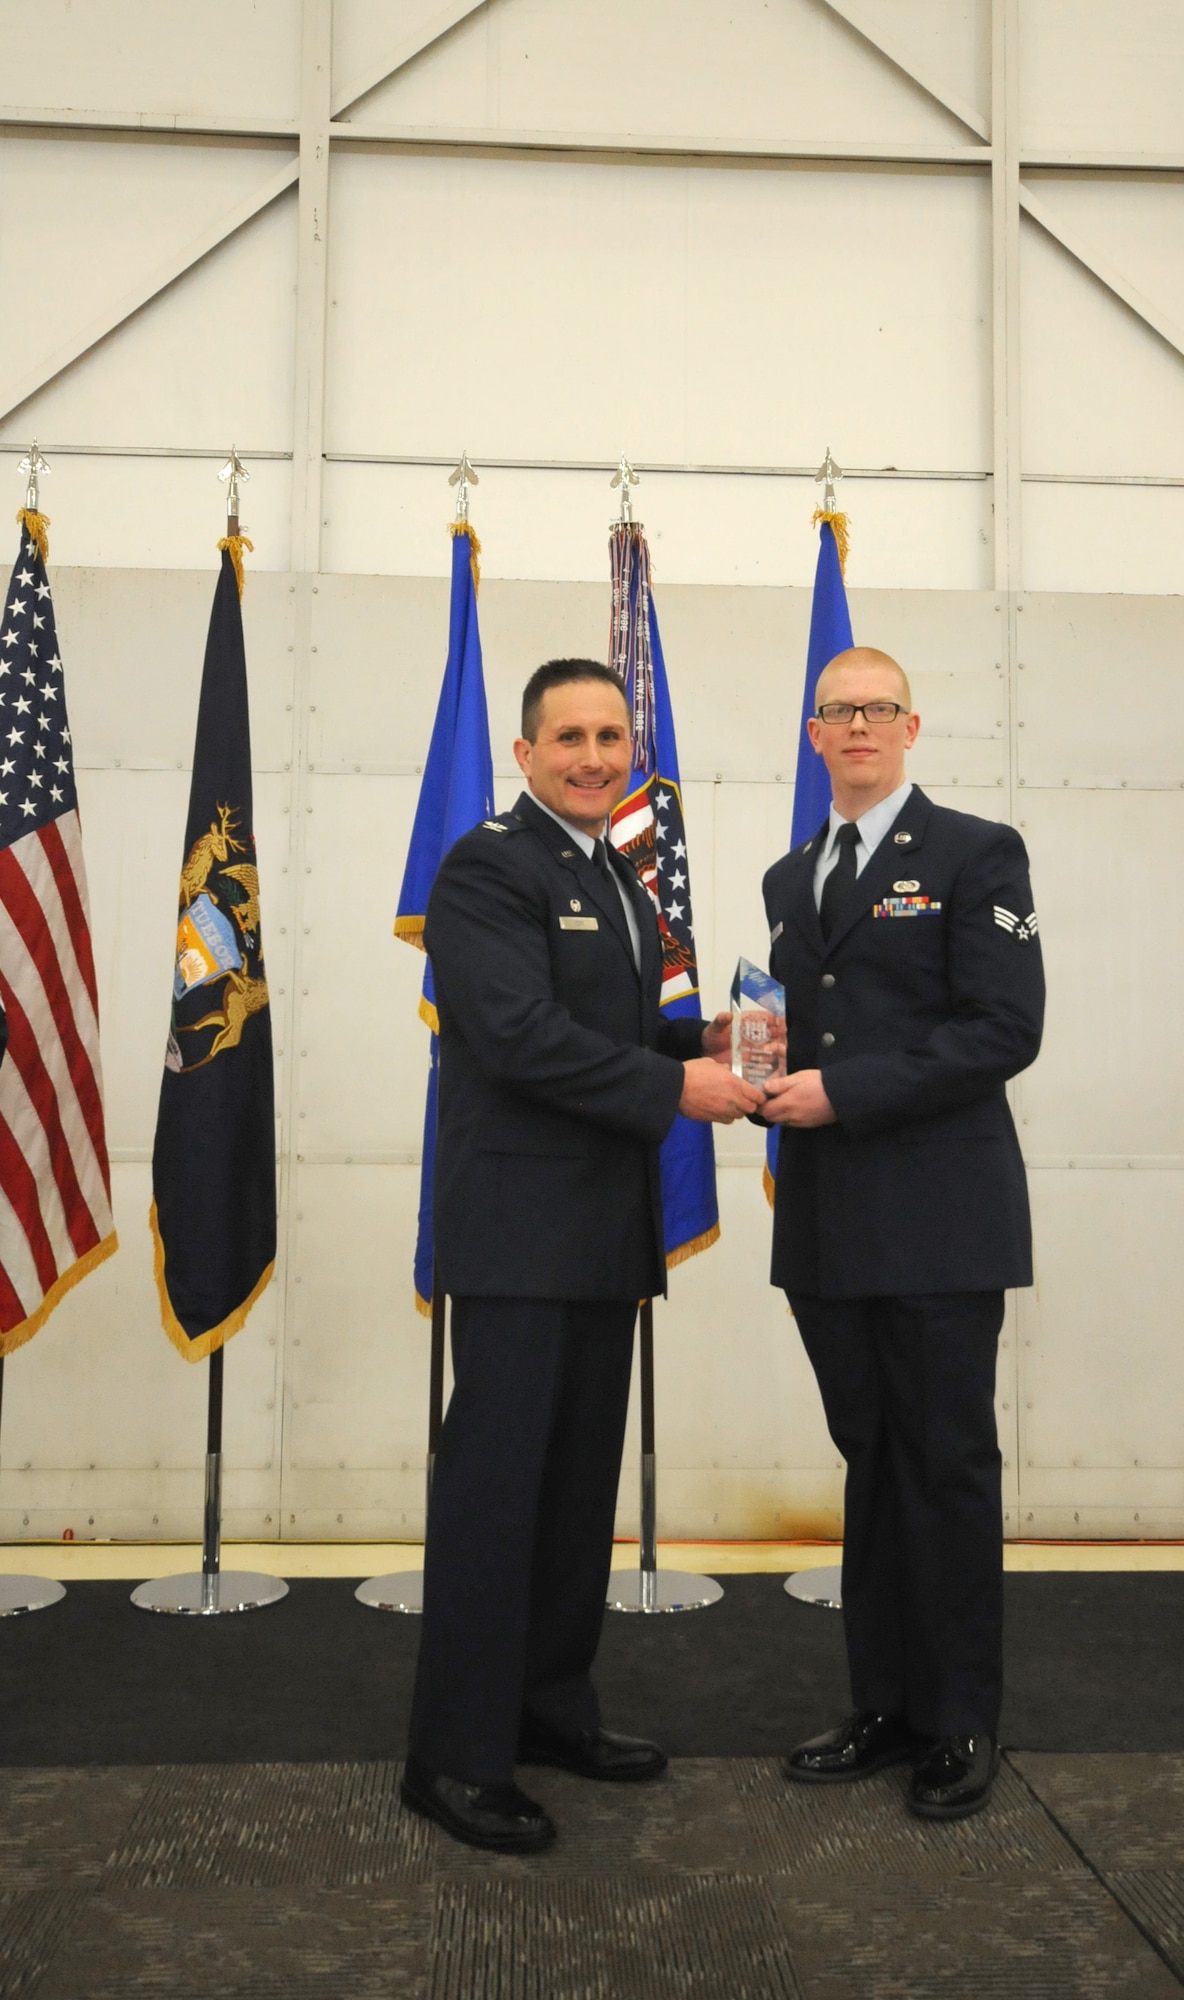 Col. Bryan Teff announces and congratulates the 2015 Airman of the Year recipients, Saturday, December 5, 2015, Battle Creek Air National Guard Base, Mich. Members awarded include, Airman of the Year, Senior Airman Erik Elliot, 110th Operations Support Squadron, Non-Commissioned Officer of Year, Tech. Sgt. Richard Parker II, 217th Air Component Operations Squadron, Senior Non-Commissioned Officer of the Year, Master Sgt. Carl Westphal II, 217th Air Operations Squadron, Company Grade Officer of the Year, 1st Lt. Justin Andrews, 217th Air Component Operations Squadron, 1st Sgt. of the Year, Master Sgt. Darrell Kingsbury, 217th Air Operations Group, Honor Guard Member of the Year, Staff Sgt. Amanda Bean, Battle Creek Air National Guard Enlisted Memorial Scholarship recipient, Jacob Zahm, annual 110th Attack Wing Outstanding Unit Safety Representative, Master Sgt. Felica Harris, and Outstanding Individual Safety Contribution, Master Sgt. Luke Wimby, and 110th Attack Wing Guardsman of the year, Staff Sgt. Amanda Bean. (Air National Guard Photo by Master Sgt. Sonia Pawloski/released)